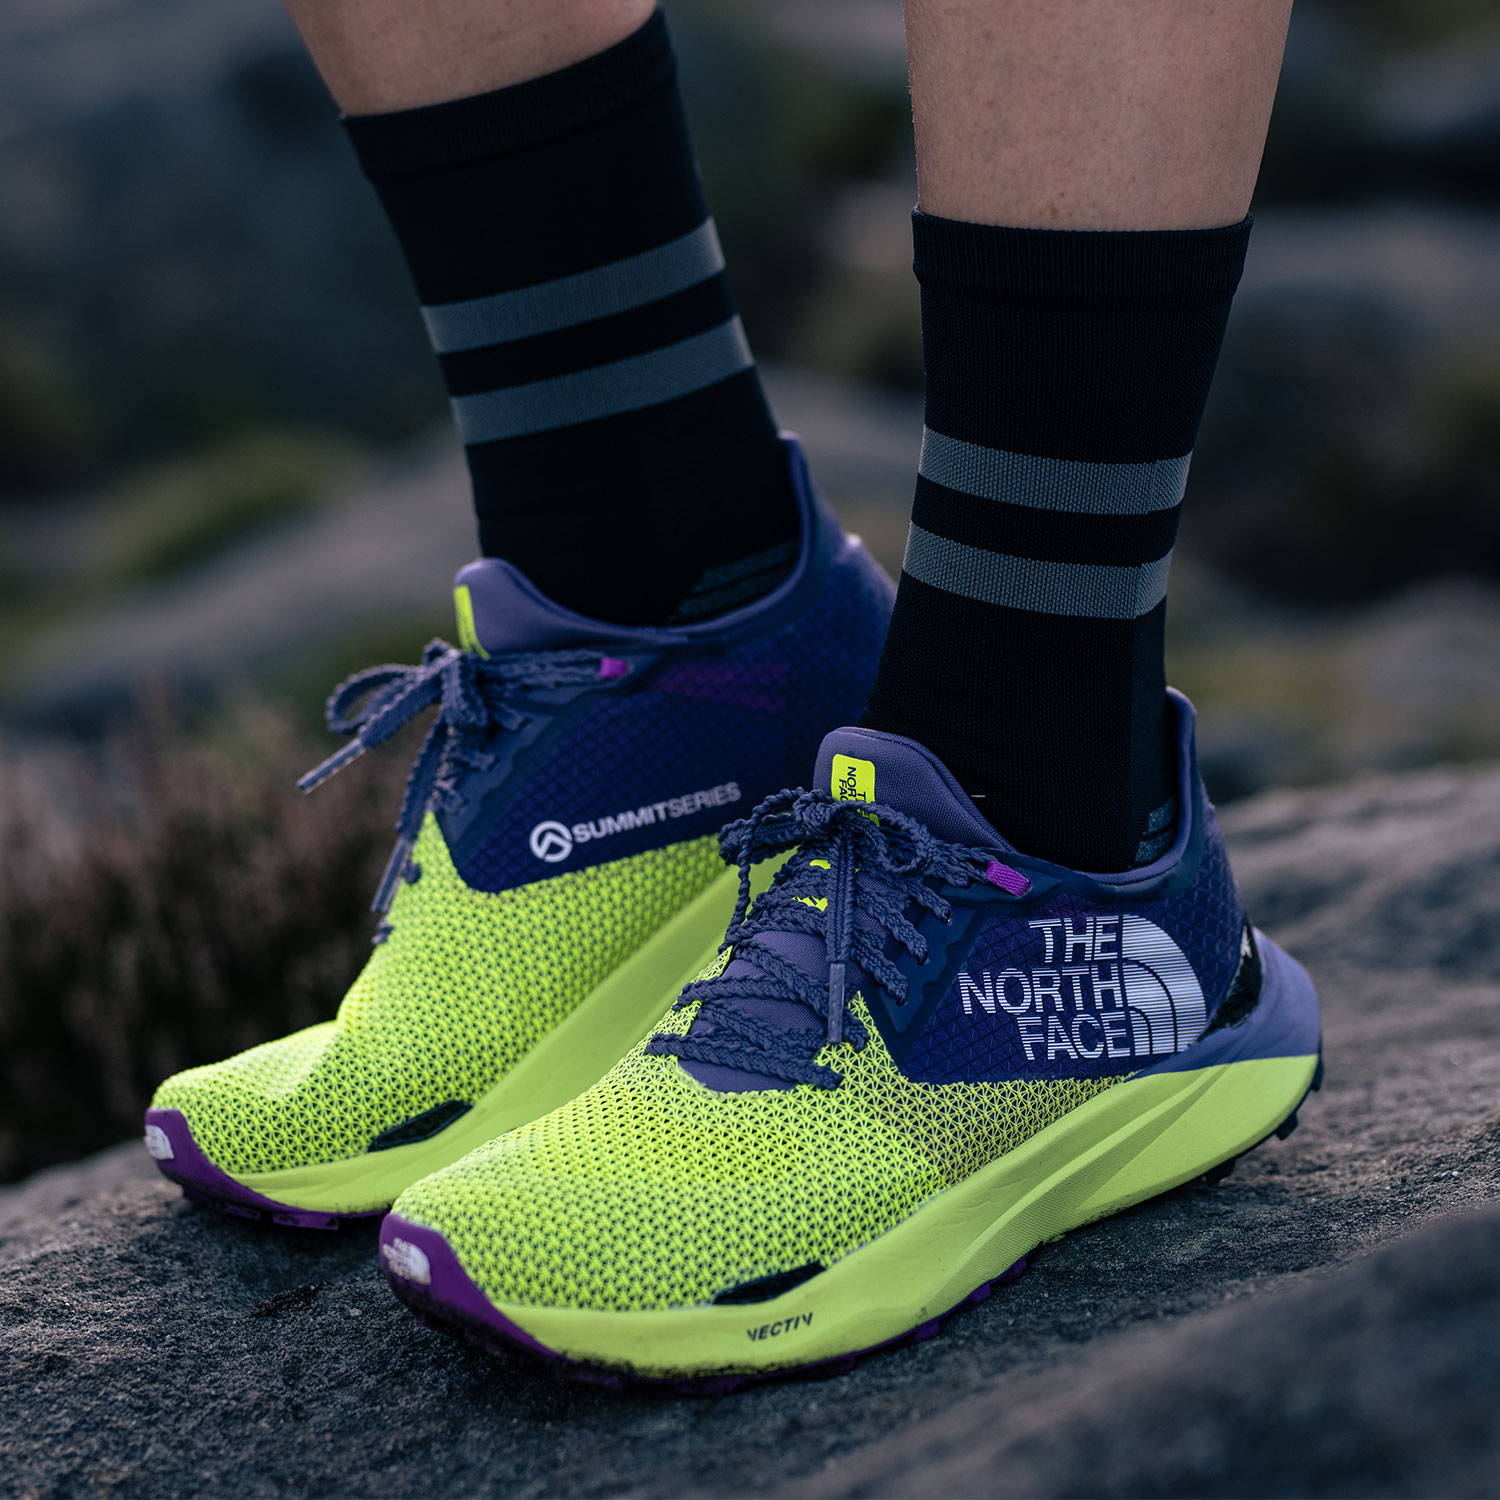 The North Face Summit Vectiv Sky - Led Yellow/Lunar Slate